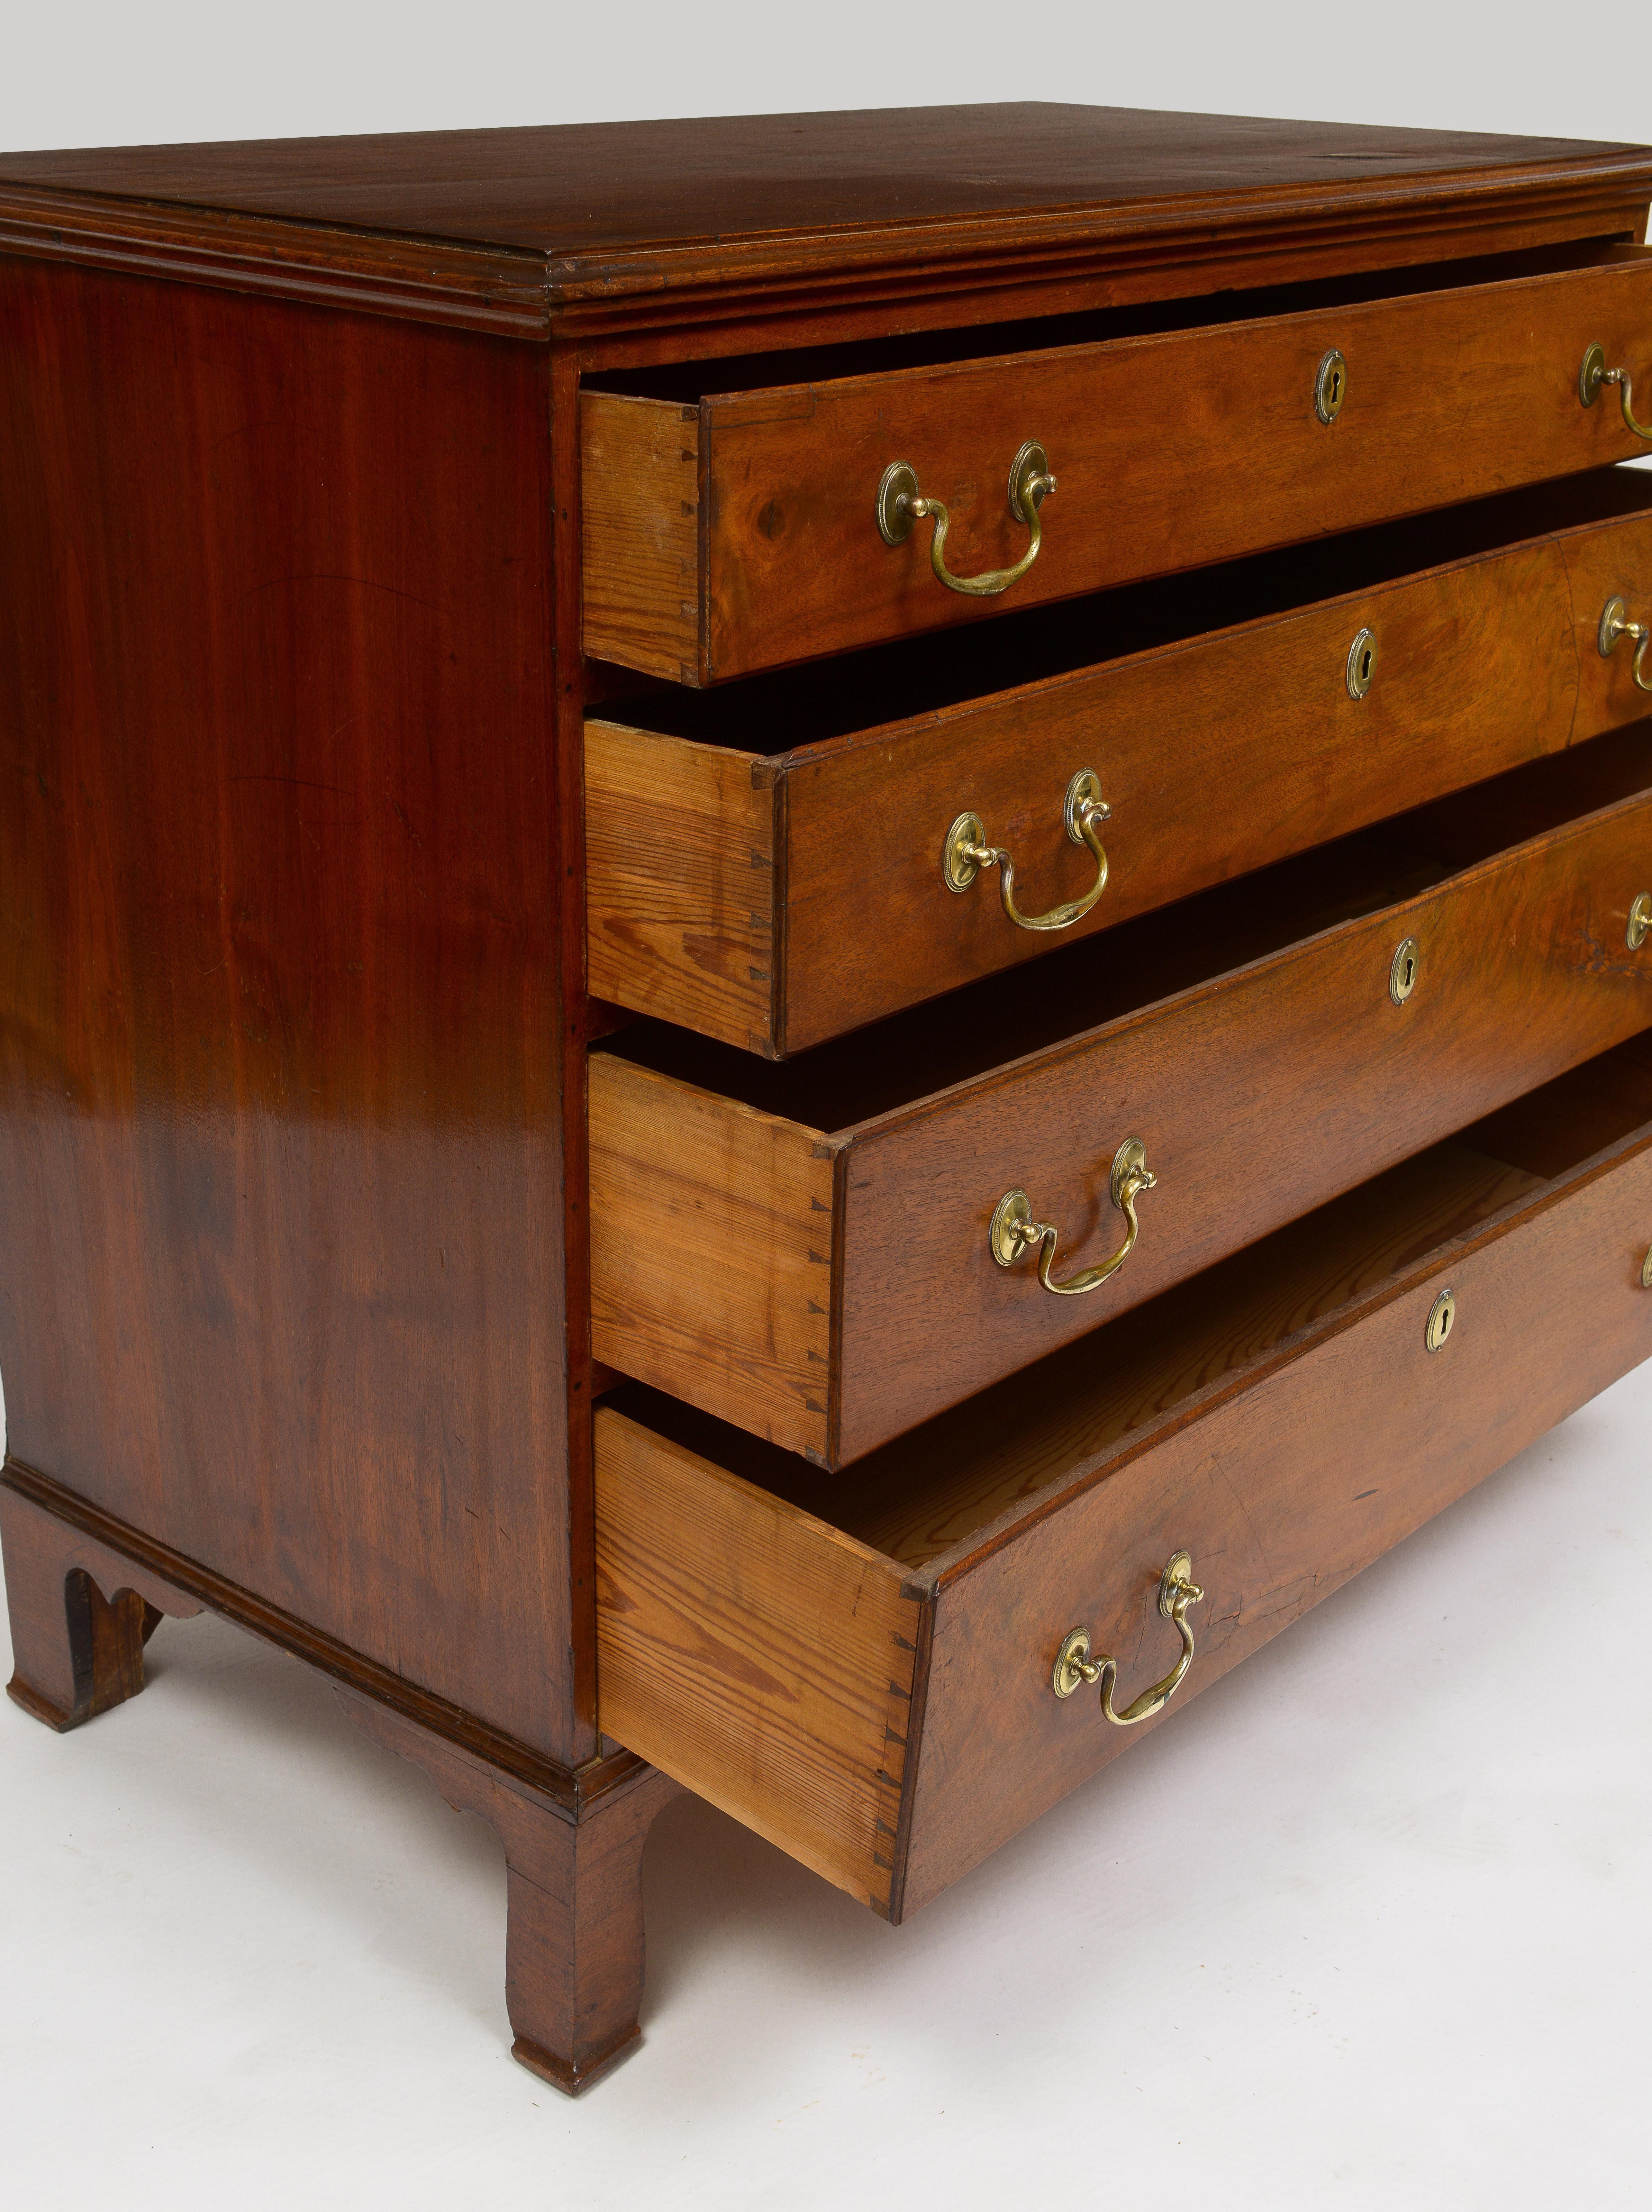 Late 18th Century American Walnut Chest of Drawers For Sale 3